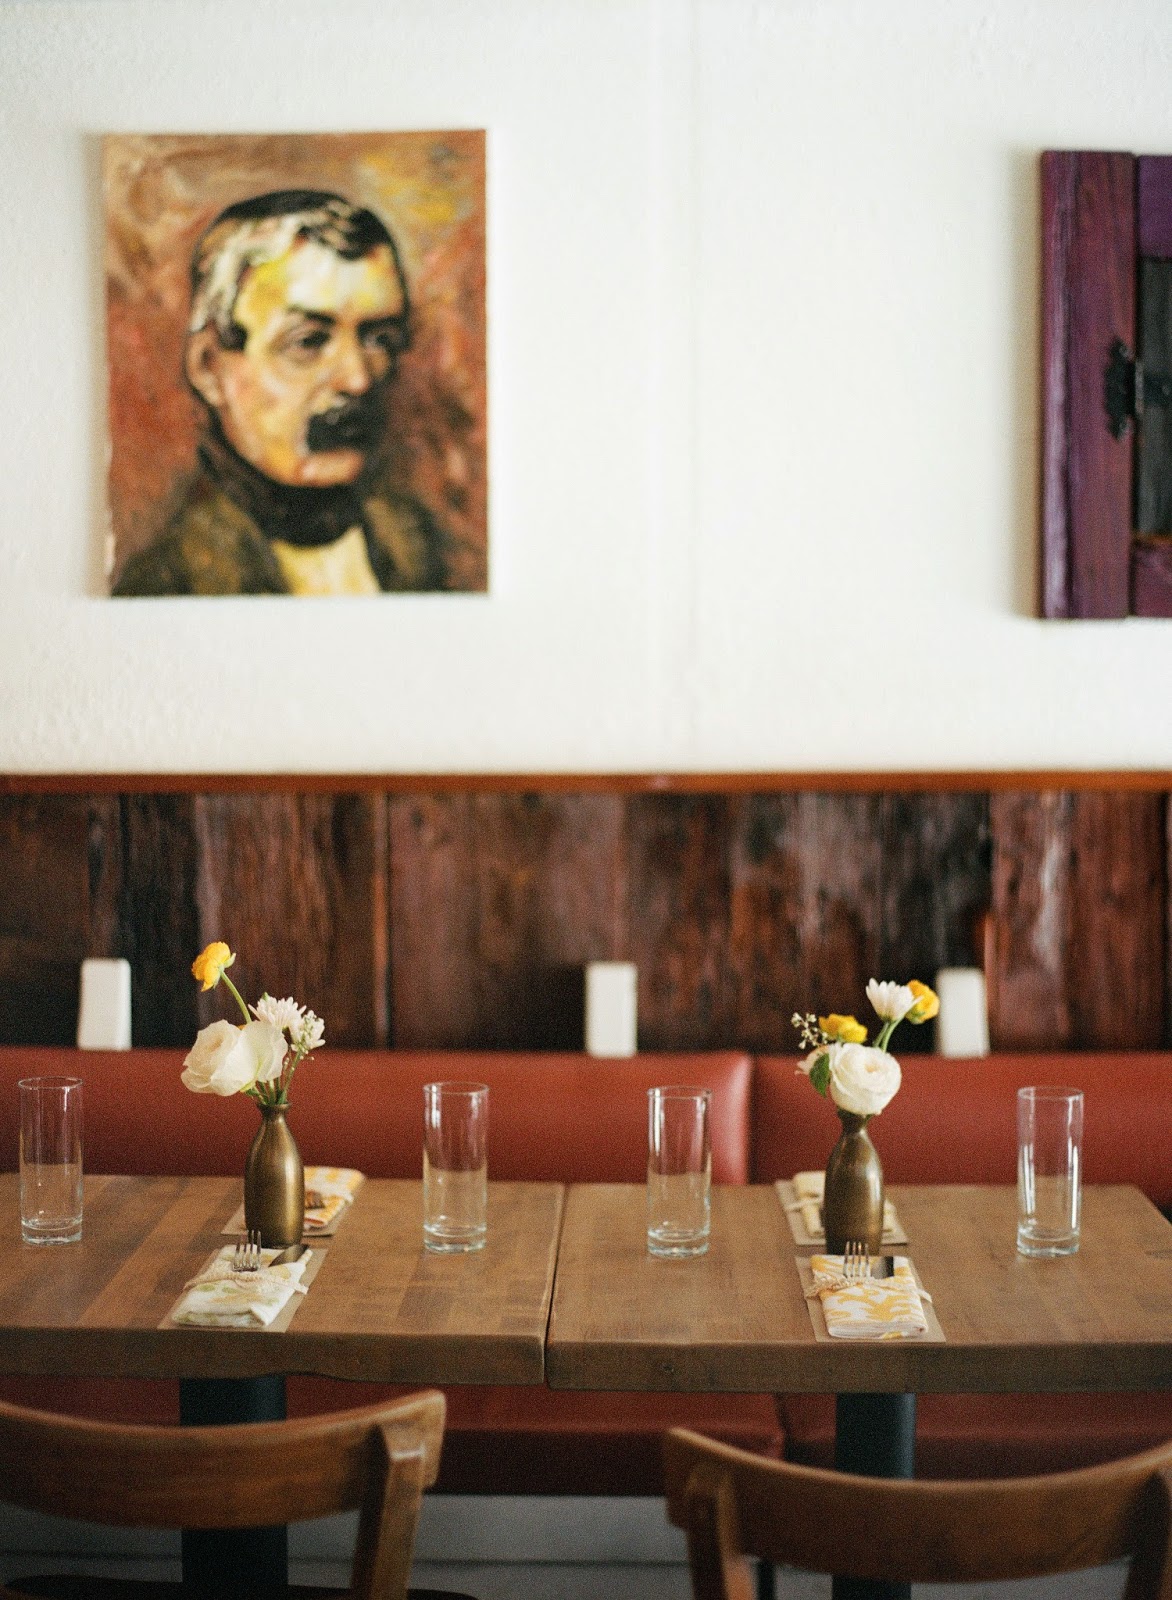 yellow and white spring wedding flowers in antique brass vases with vintage portraits at an intimate brooklyn, new york restaurant wedding dinner